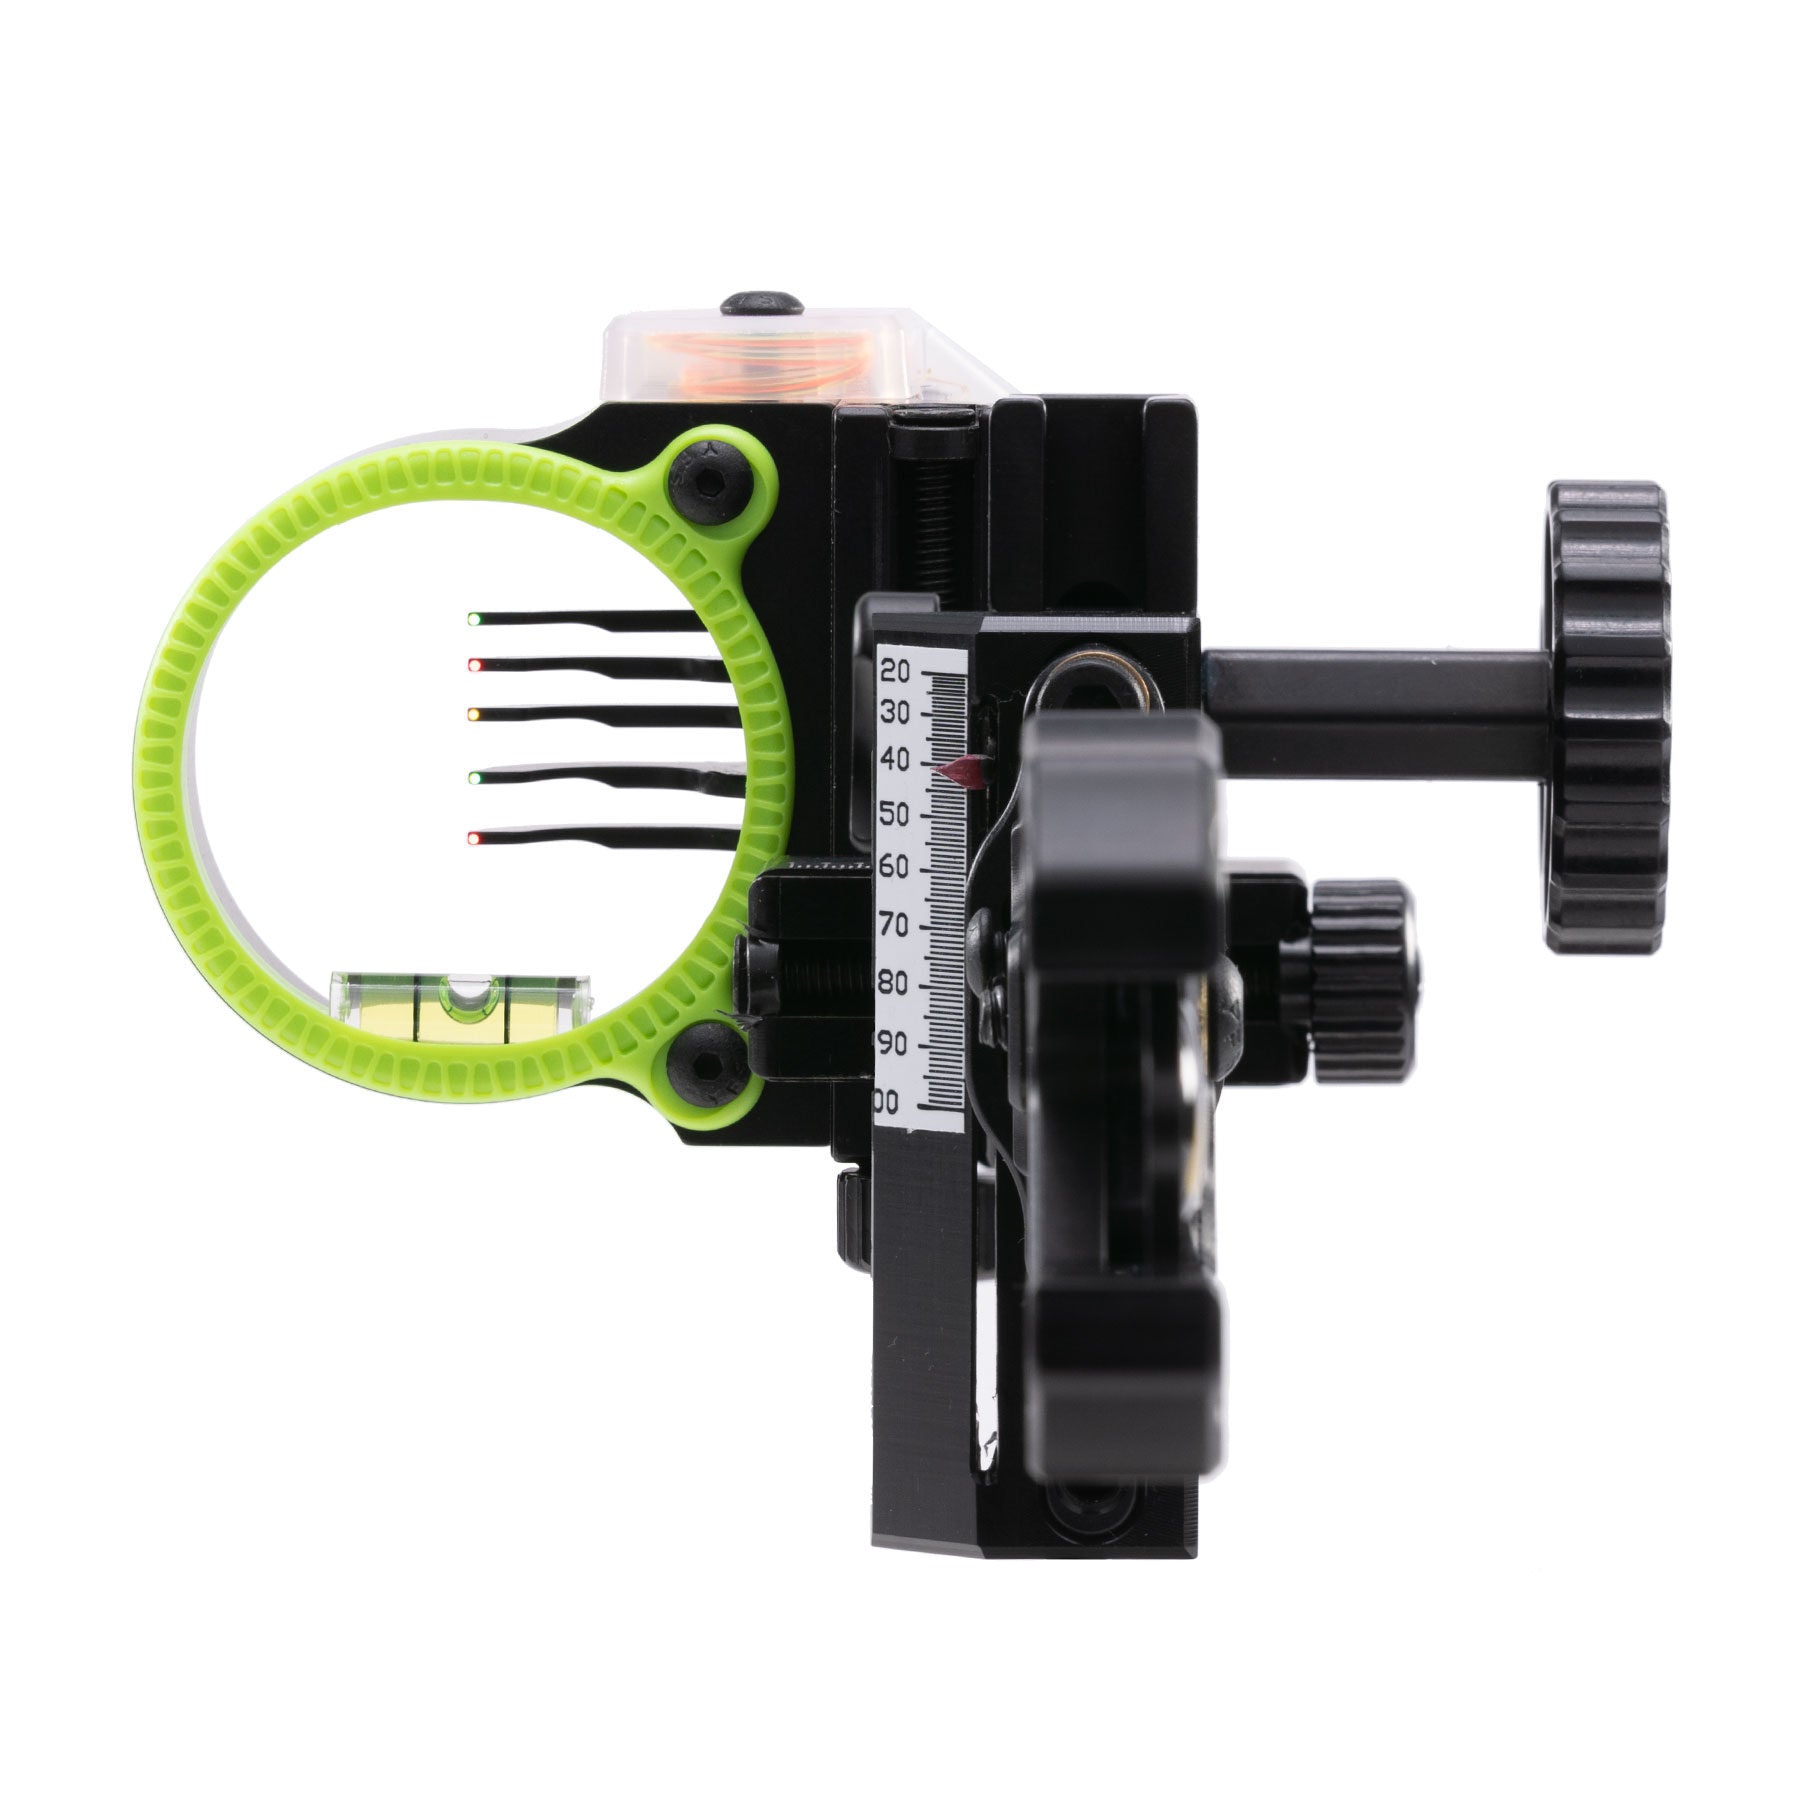 Black Gold Archery sight ascent verdict five pin bowhunting